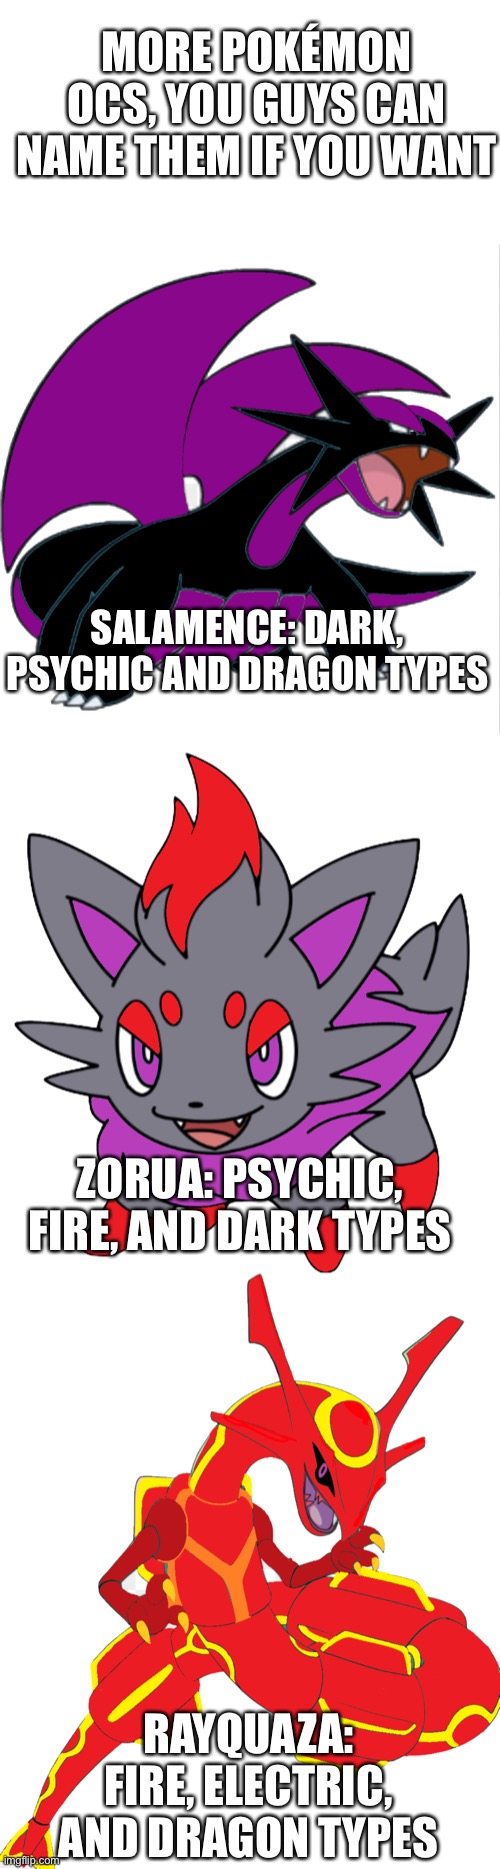 You guys can choose their names | MORE POKÉMON OCS, YOU GUYS CAN NAME THEM IF YOU WANT; SALAMENCE: DARK, PSYCHIC AND DRAGON TYPES; ZORUA: PSYCHIC, FIRE, AND DARK TYPES; RAYQUAZA: FIRE, ELECTRIC, AND DRAGON TYPES | image tagged in pokemon | made w/ Imgflip meme maker